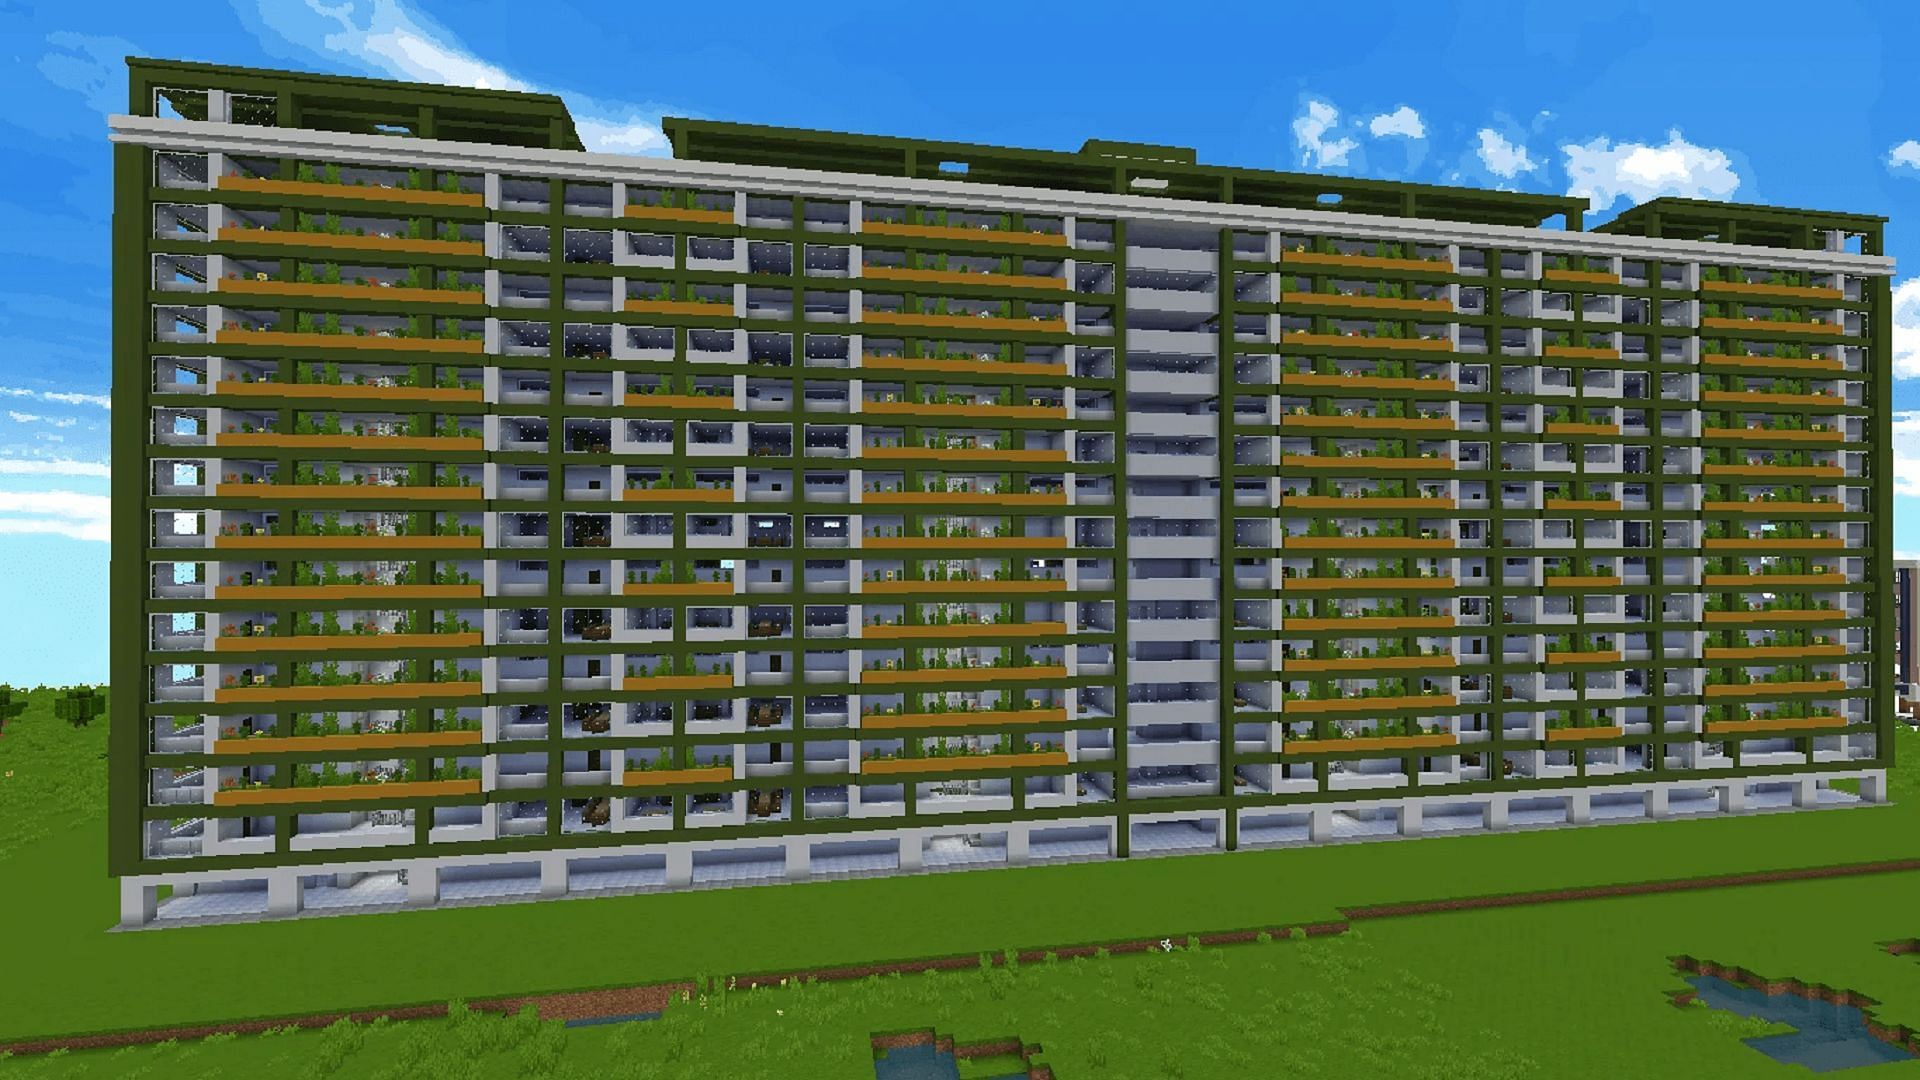 Creating Minecraft builds using brutalist architecture can be cheap and rewarding (Image via JorCano127/Reddit)